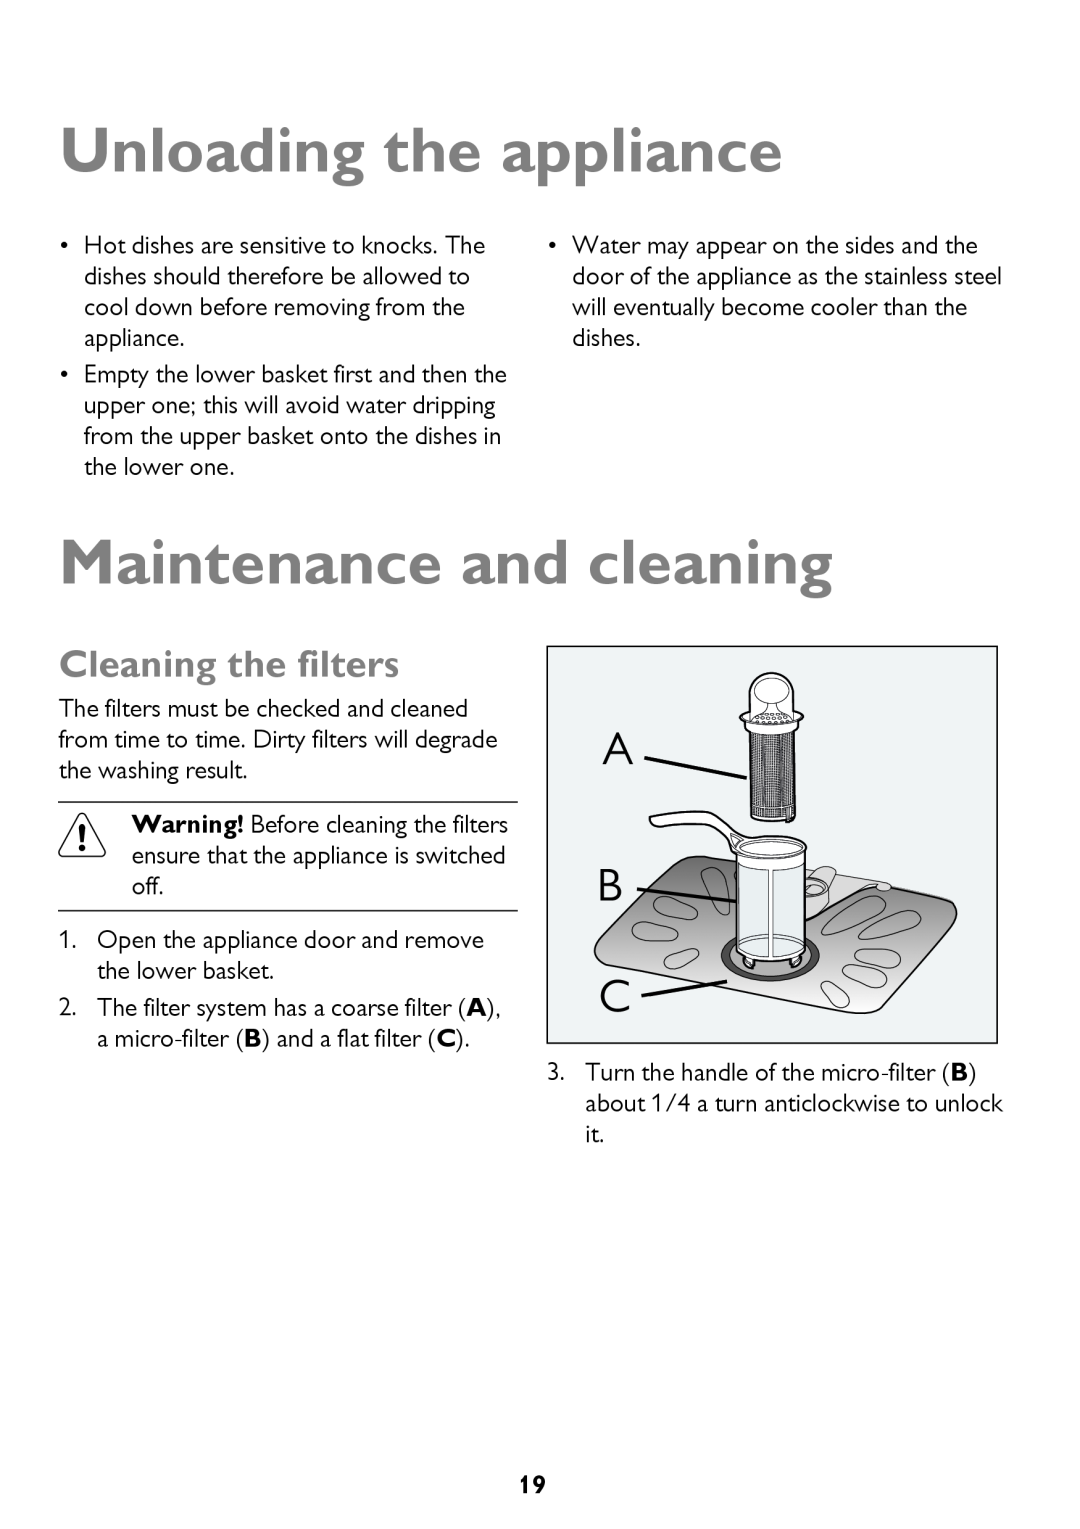 John Lewis JLBIDW 1201 instruction manual Unloading the appliance, Maintenance and cleaning, Cleaning the filters 